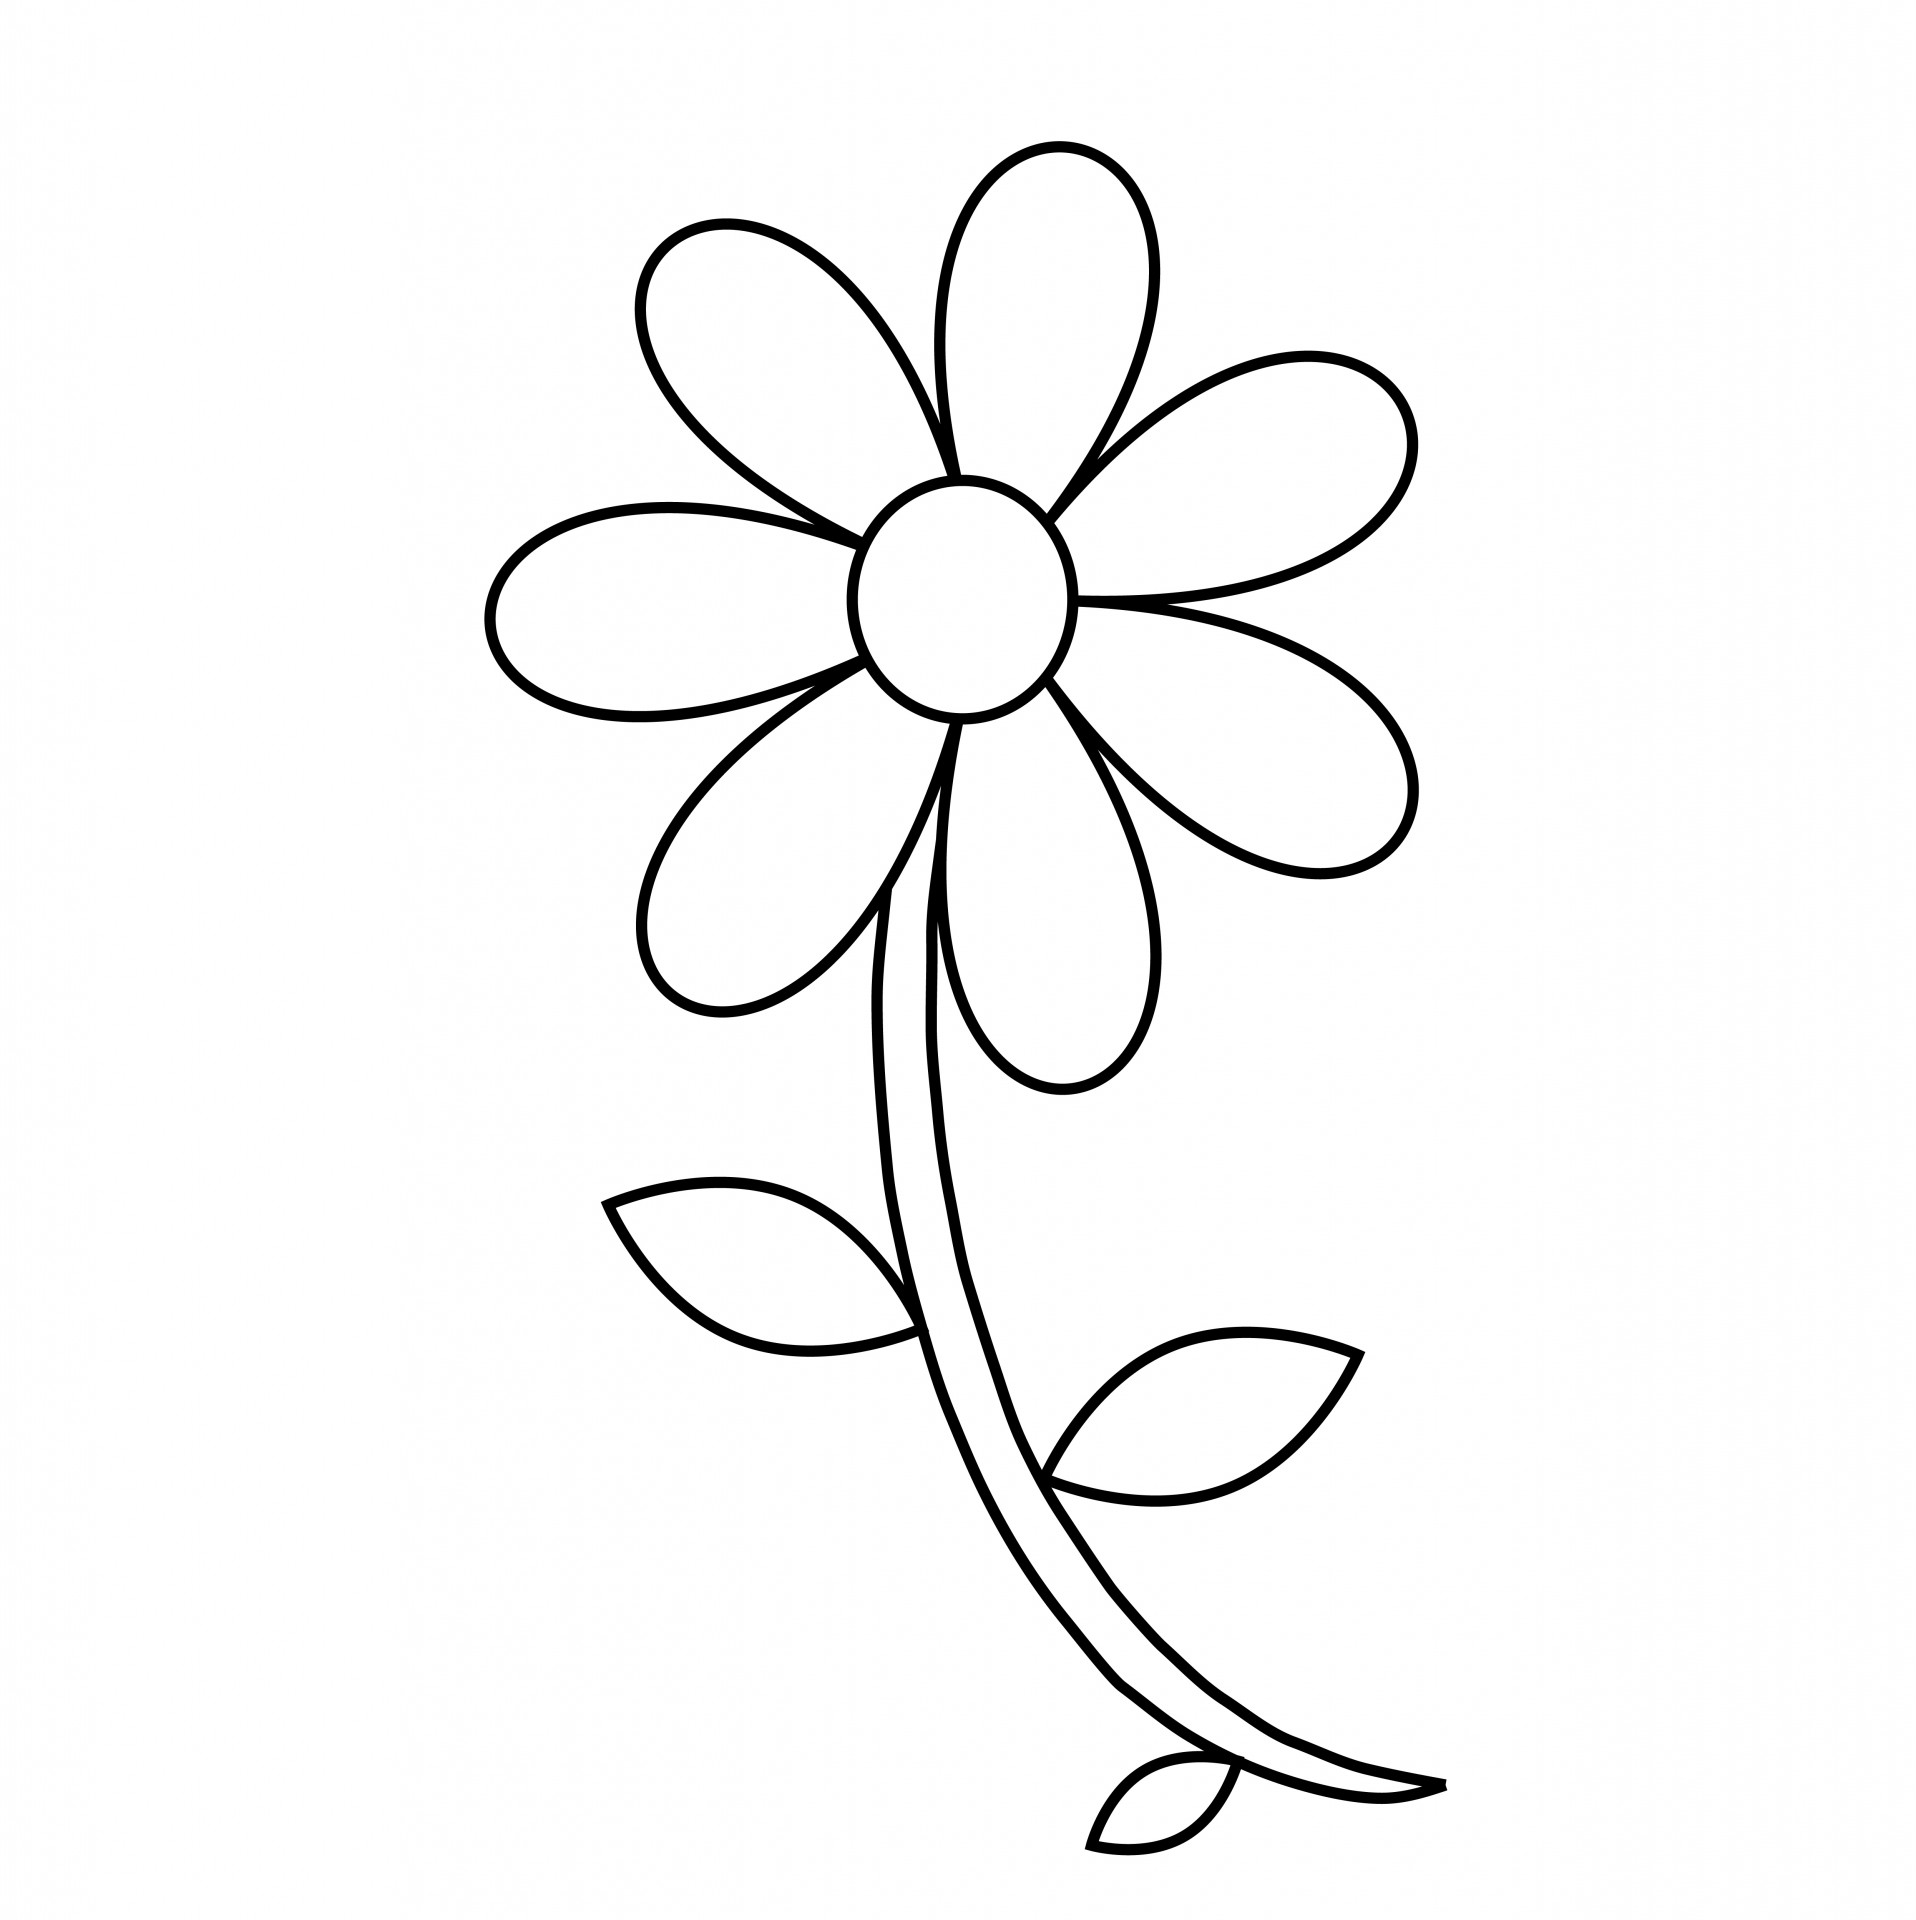 Free Flower Outline Pictures, Download Free Flower Outline Pictures png